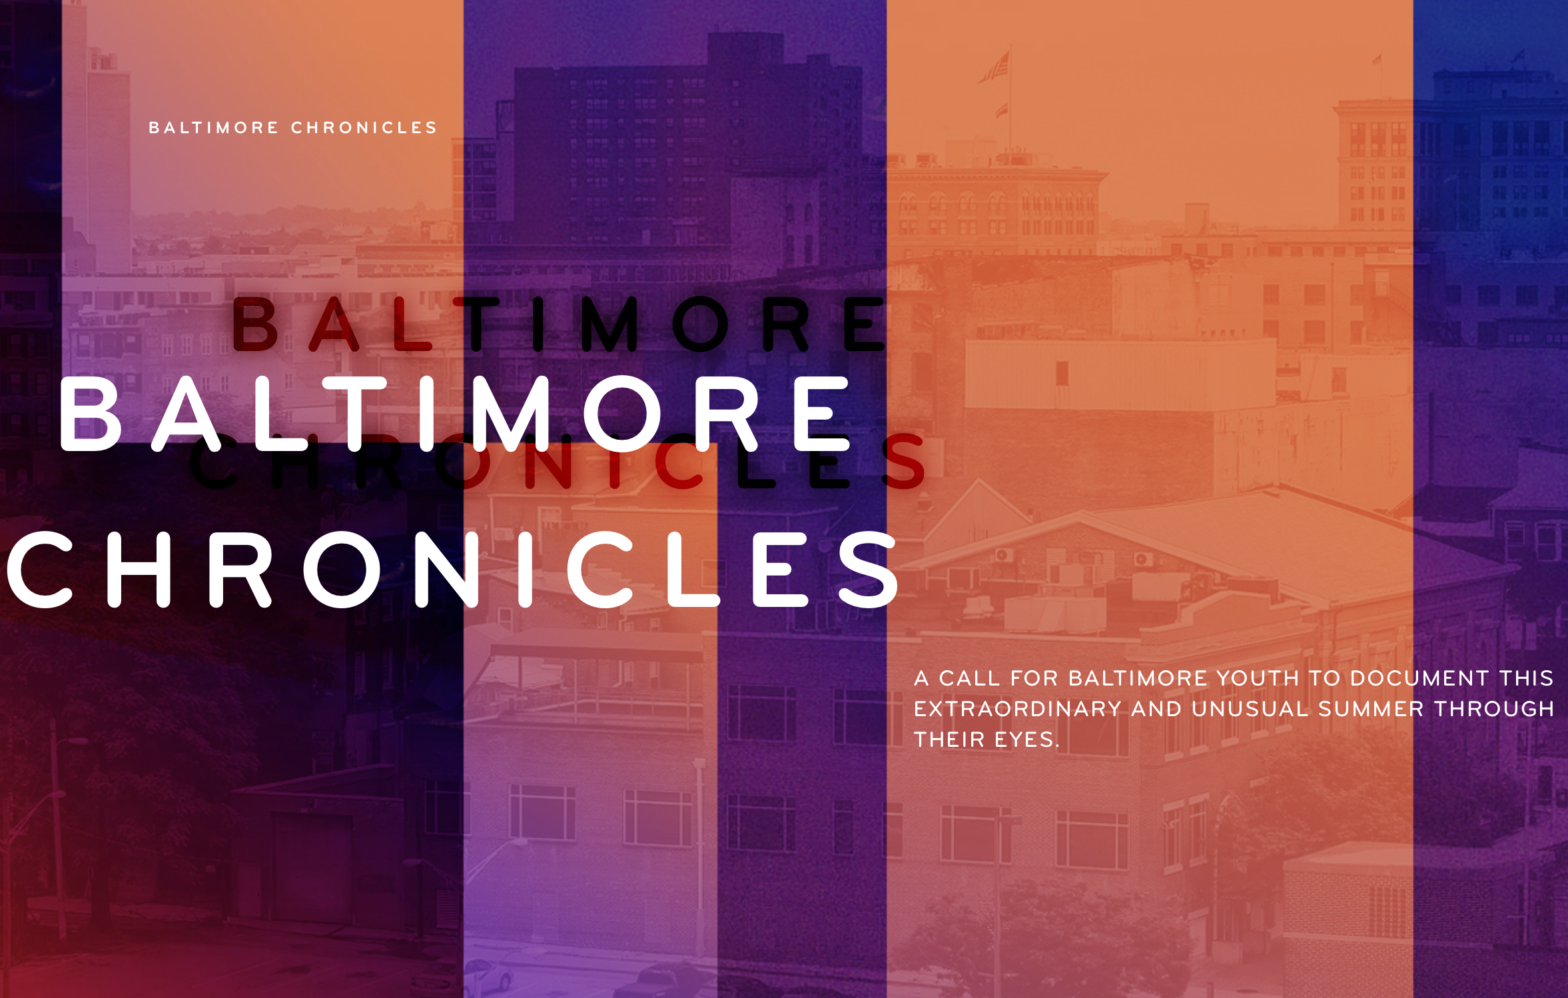 Park Partners with the SNF Parkway for Baltimore Chronicles